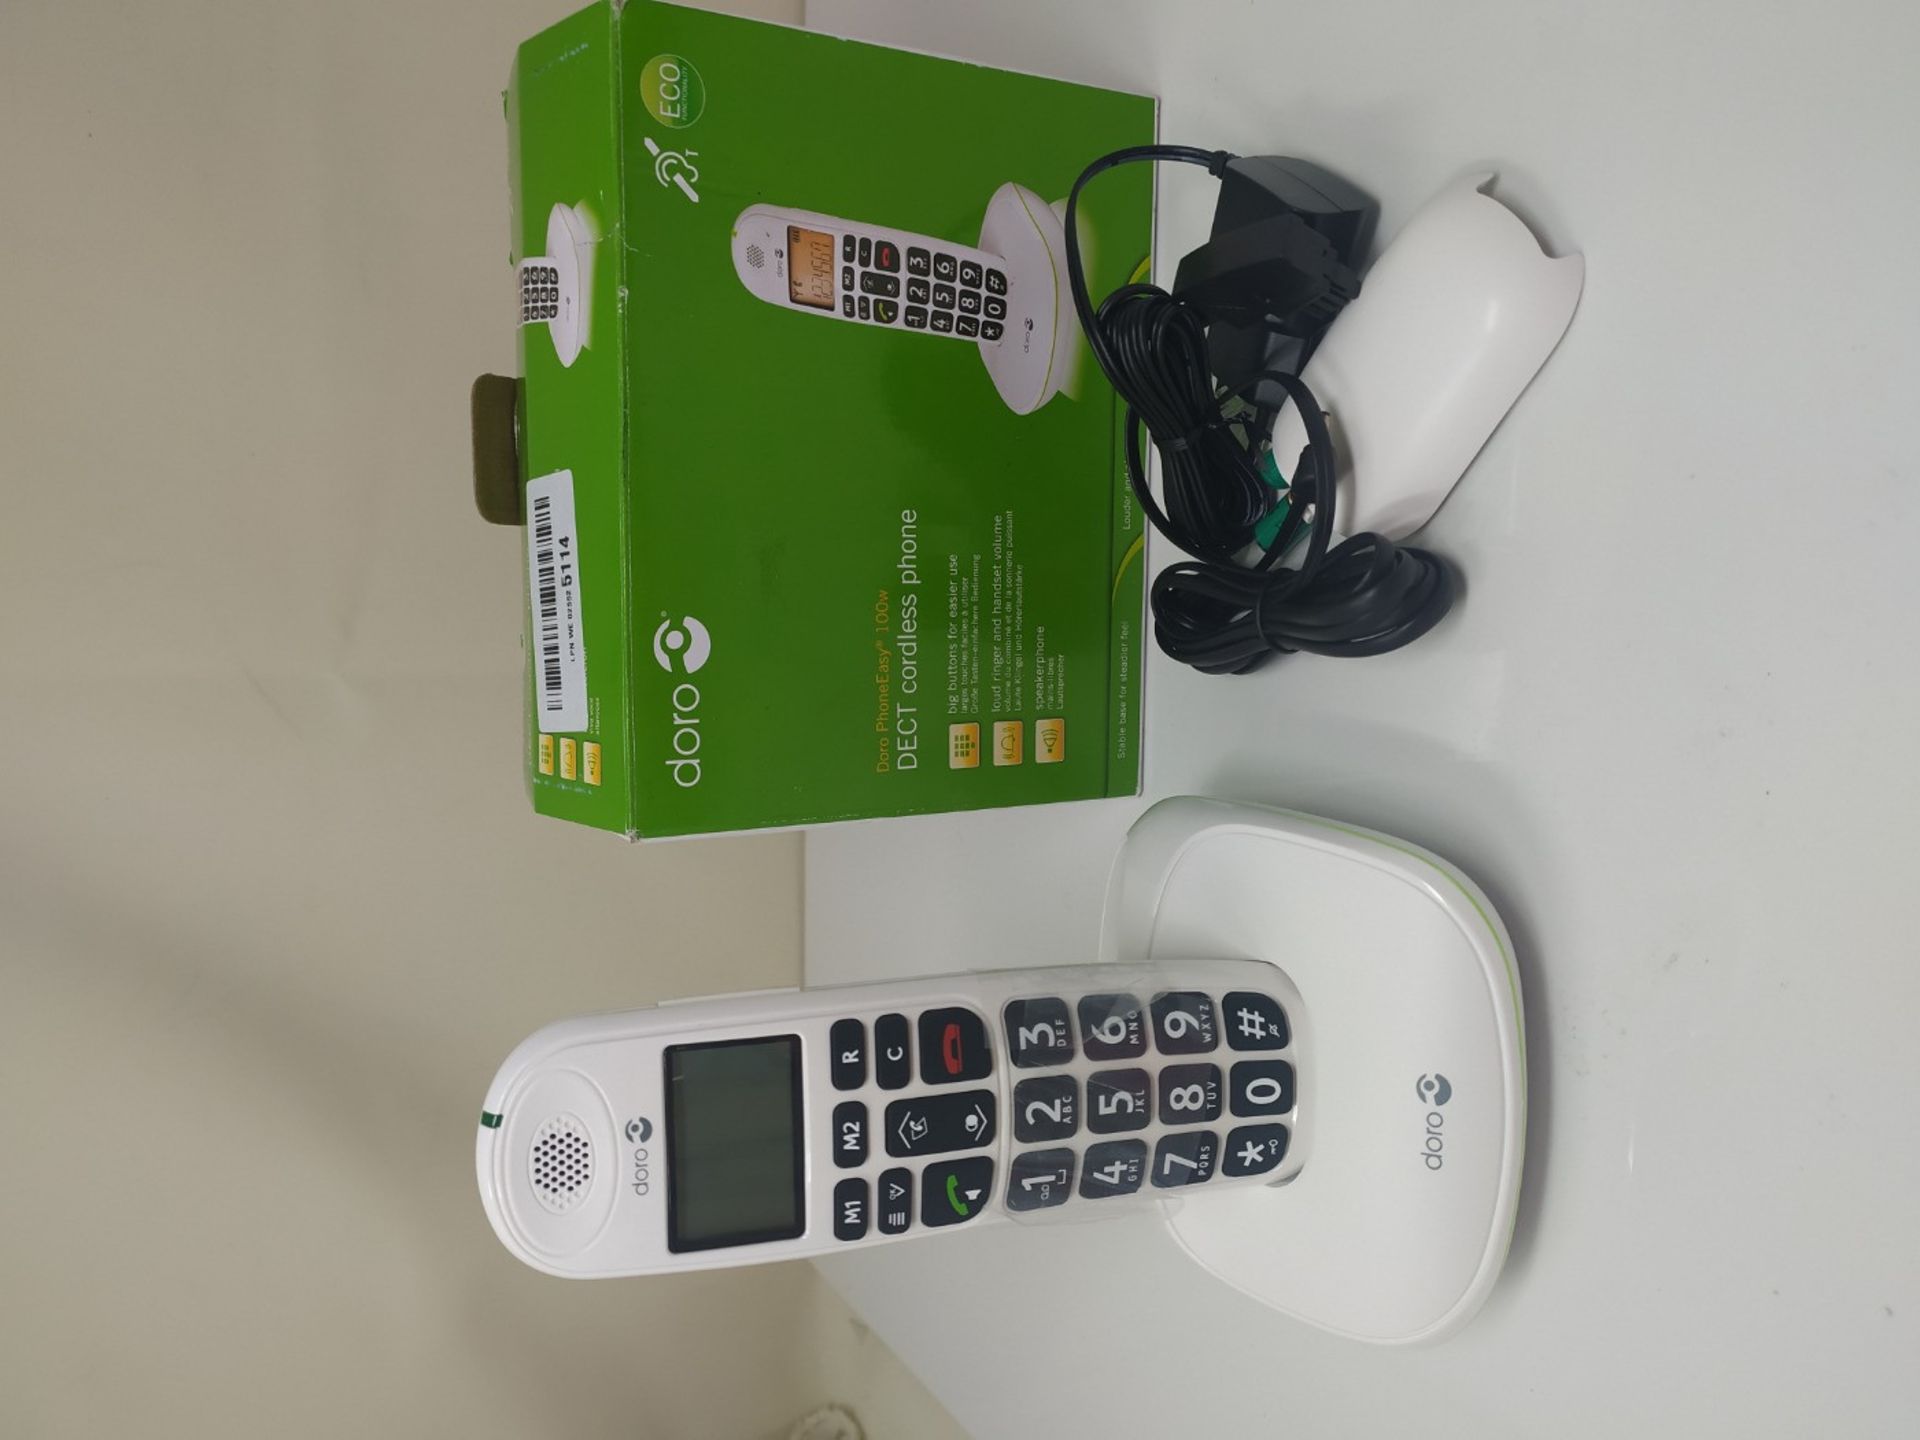 Doro Phone EASY 100W Cordless Phone (Hands Free Functionality, Low Radiation, Elderly - Image 2 of 2